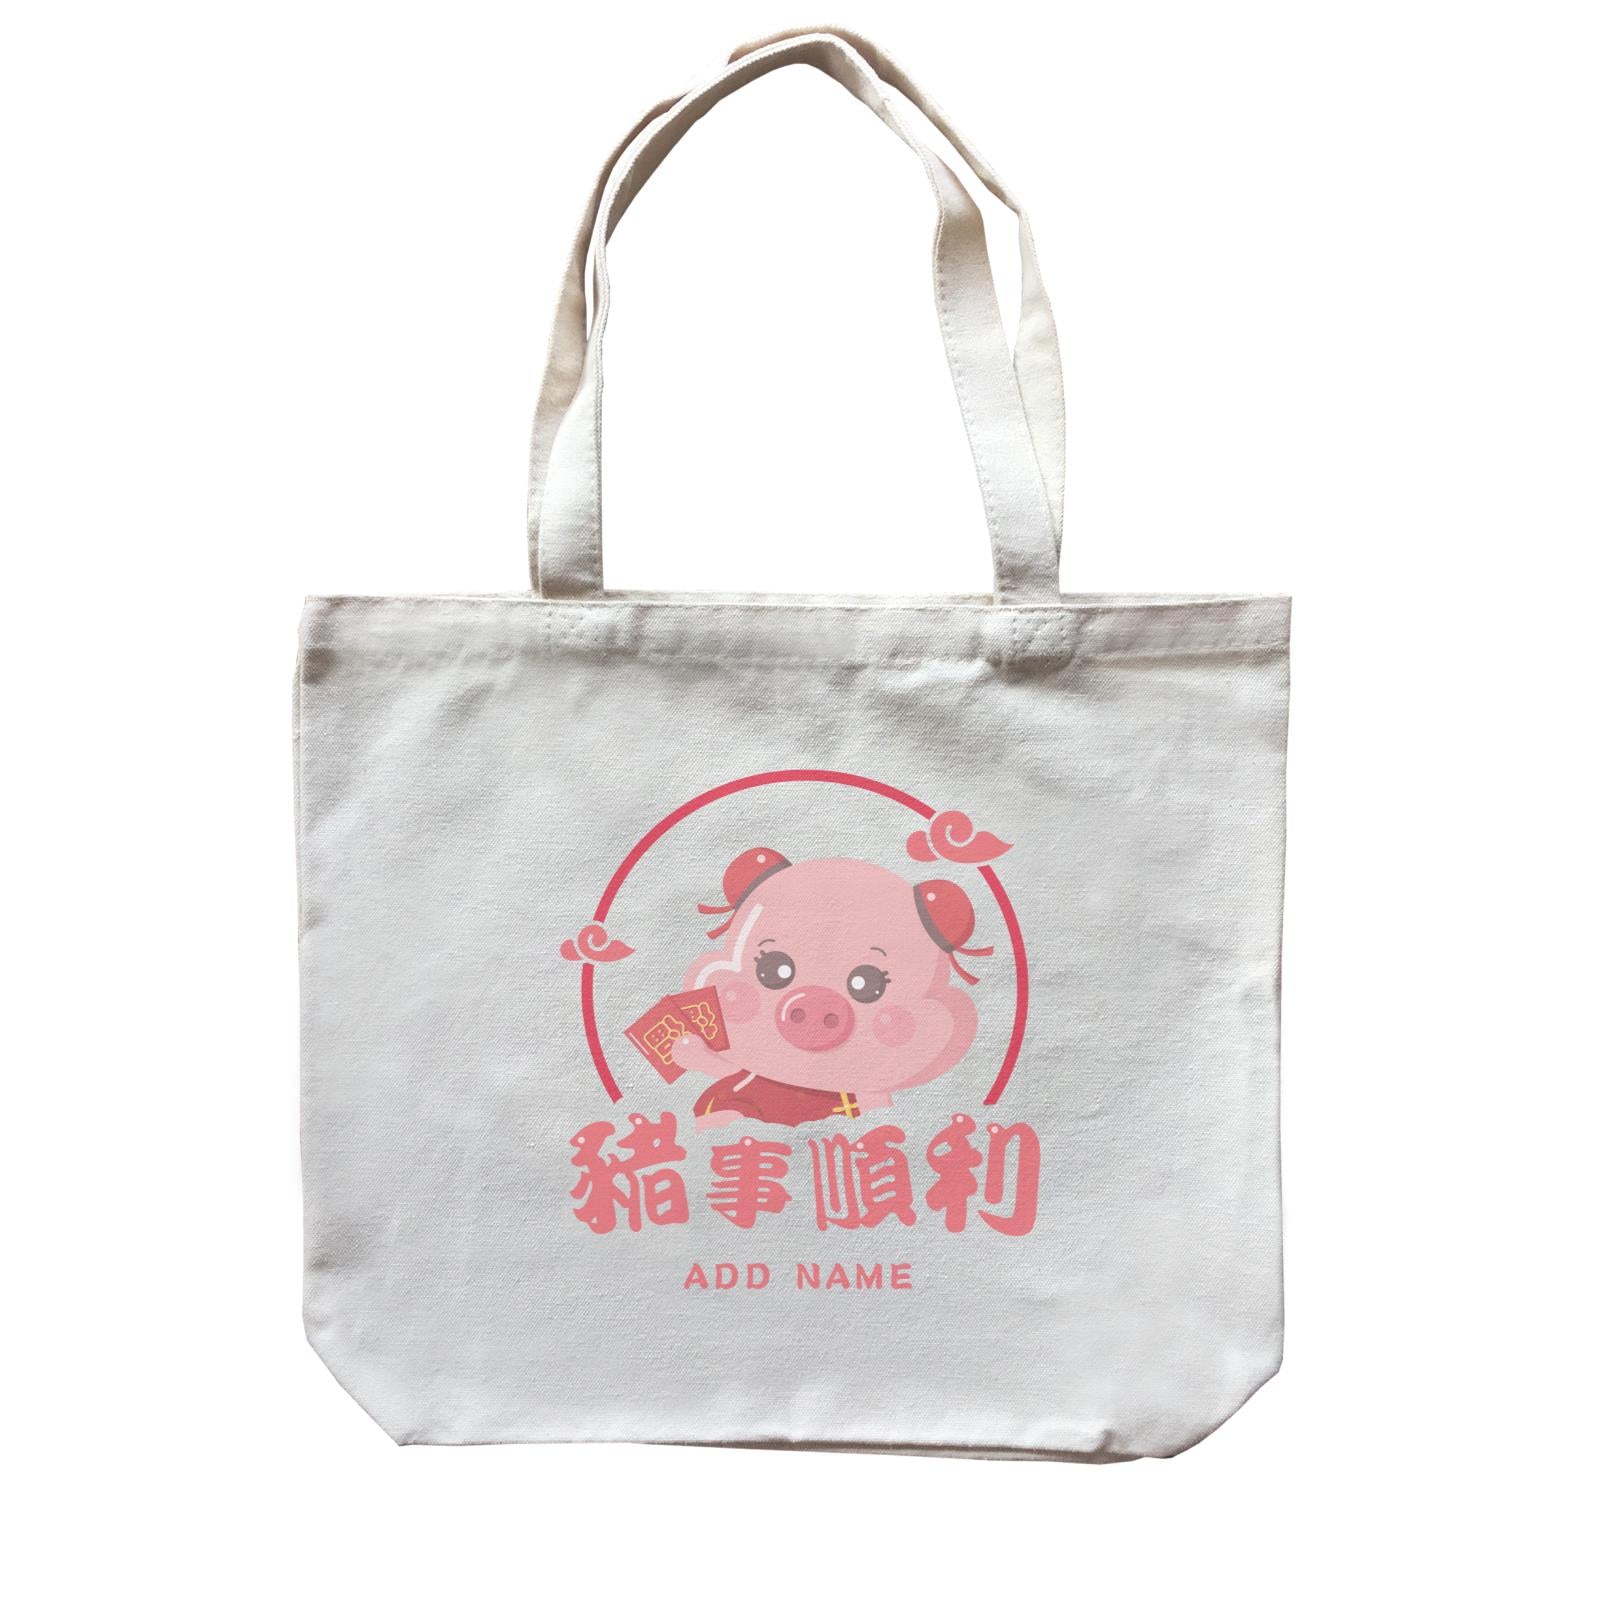 Chinese New Year Cute Pig Emblem Mom Accessories With Addname Canvas Bag